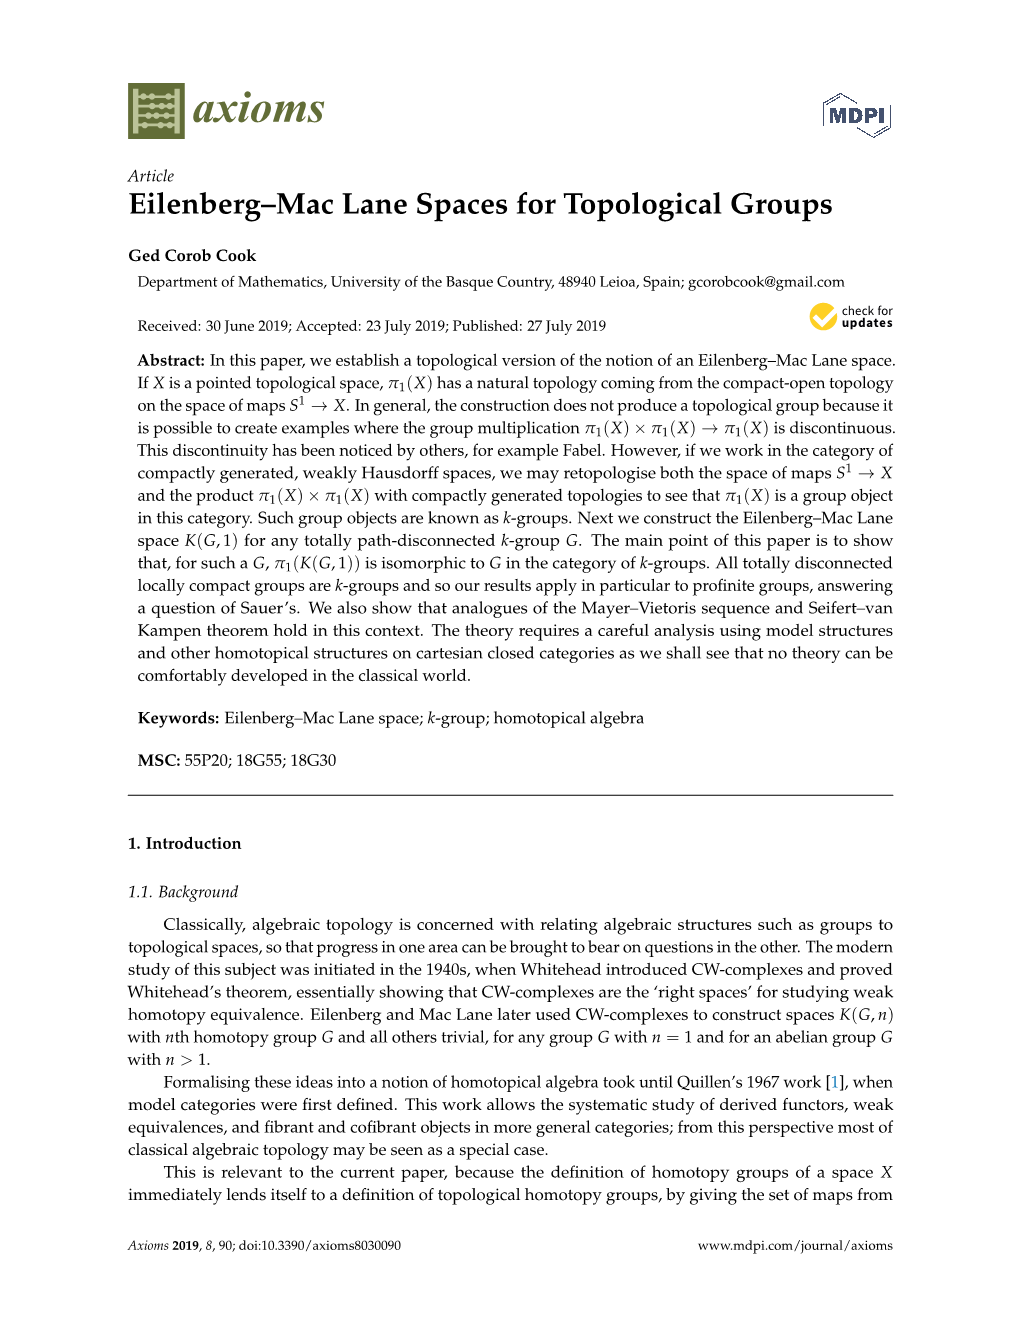 Eilenberg–Mac Lane Spaces for Topological Groups